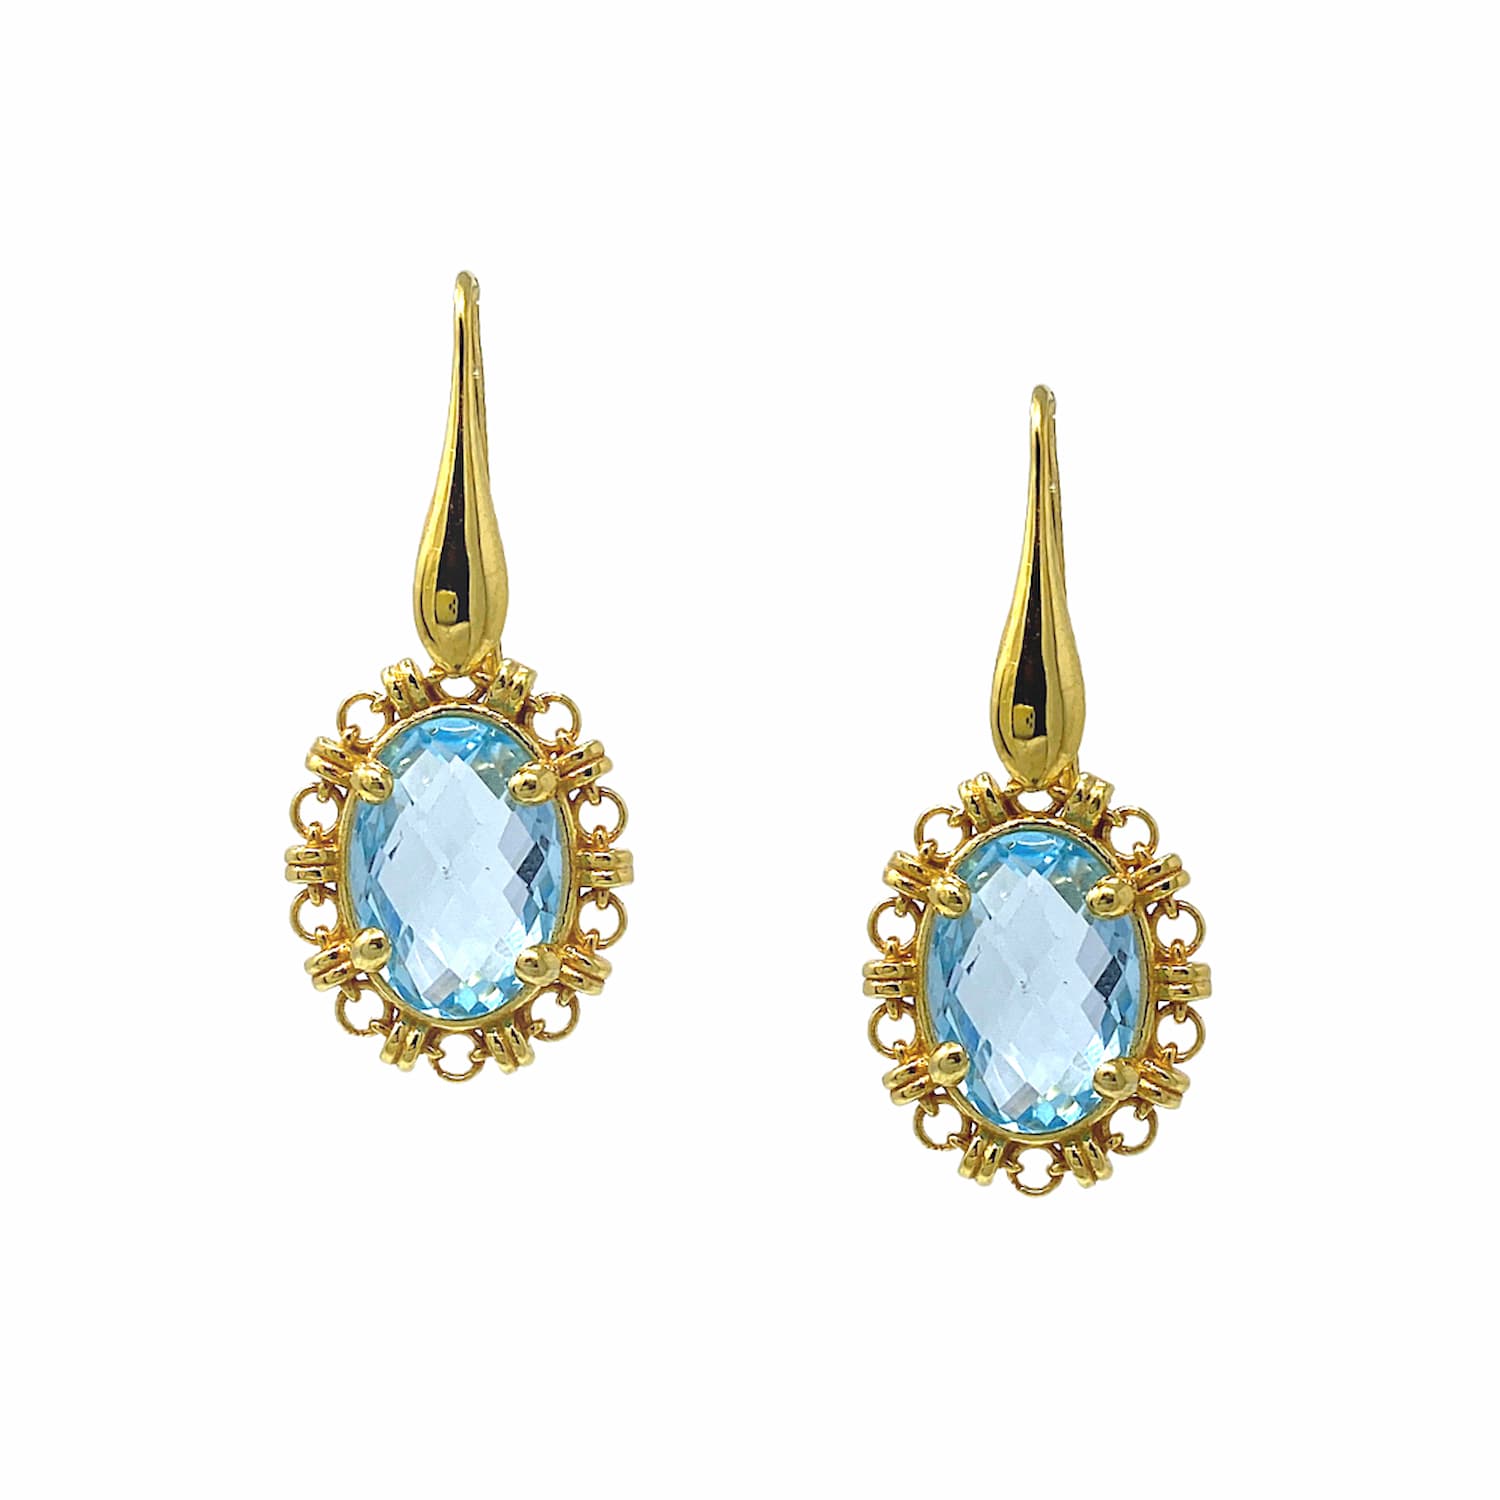 Aperitivo Earrings in Gold with Blue Topaz